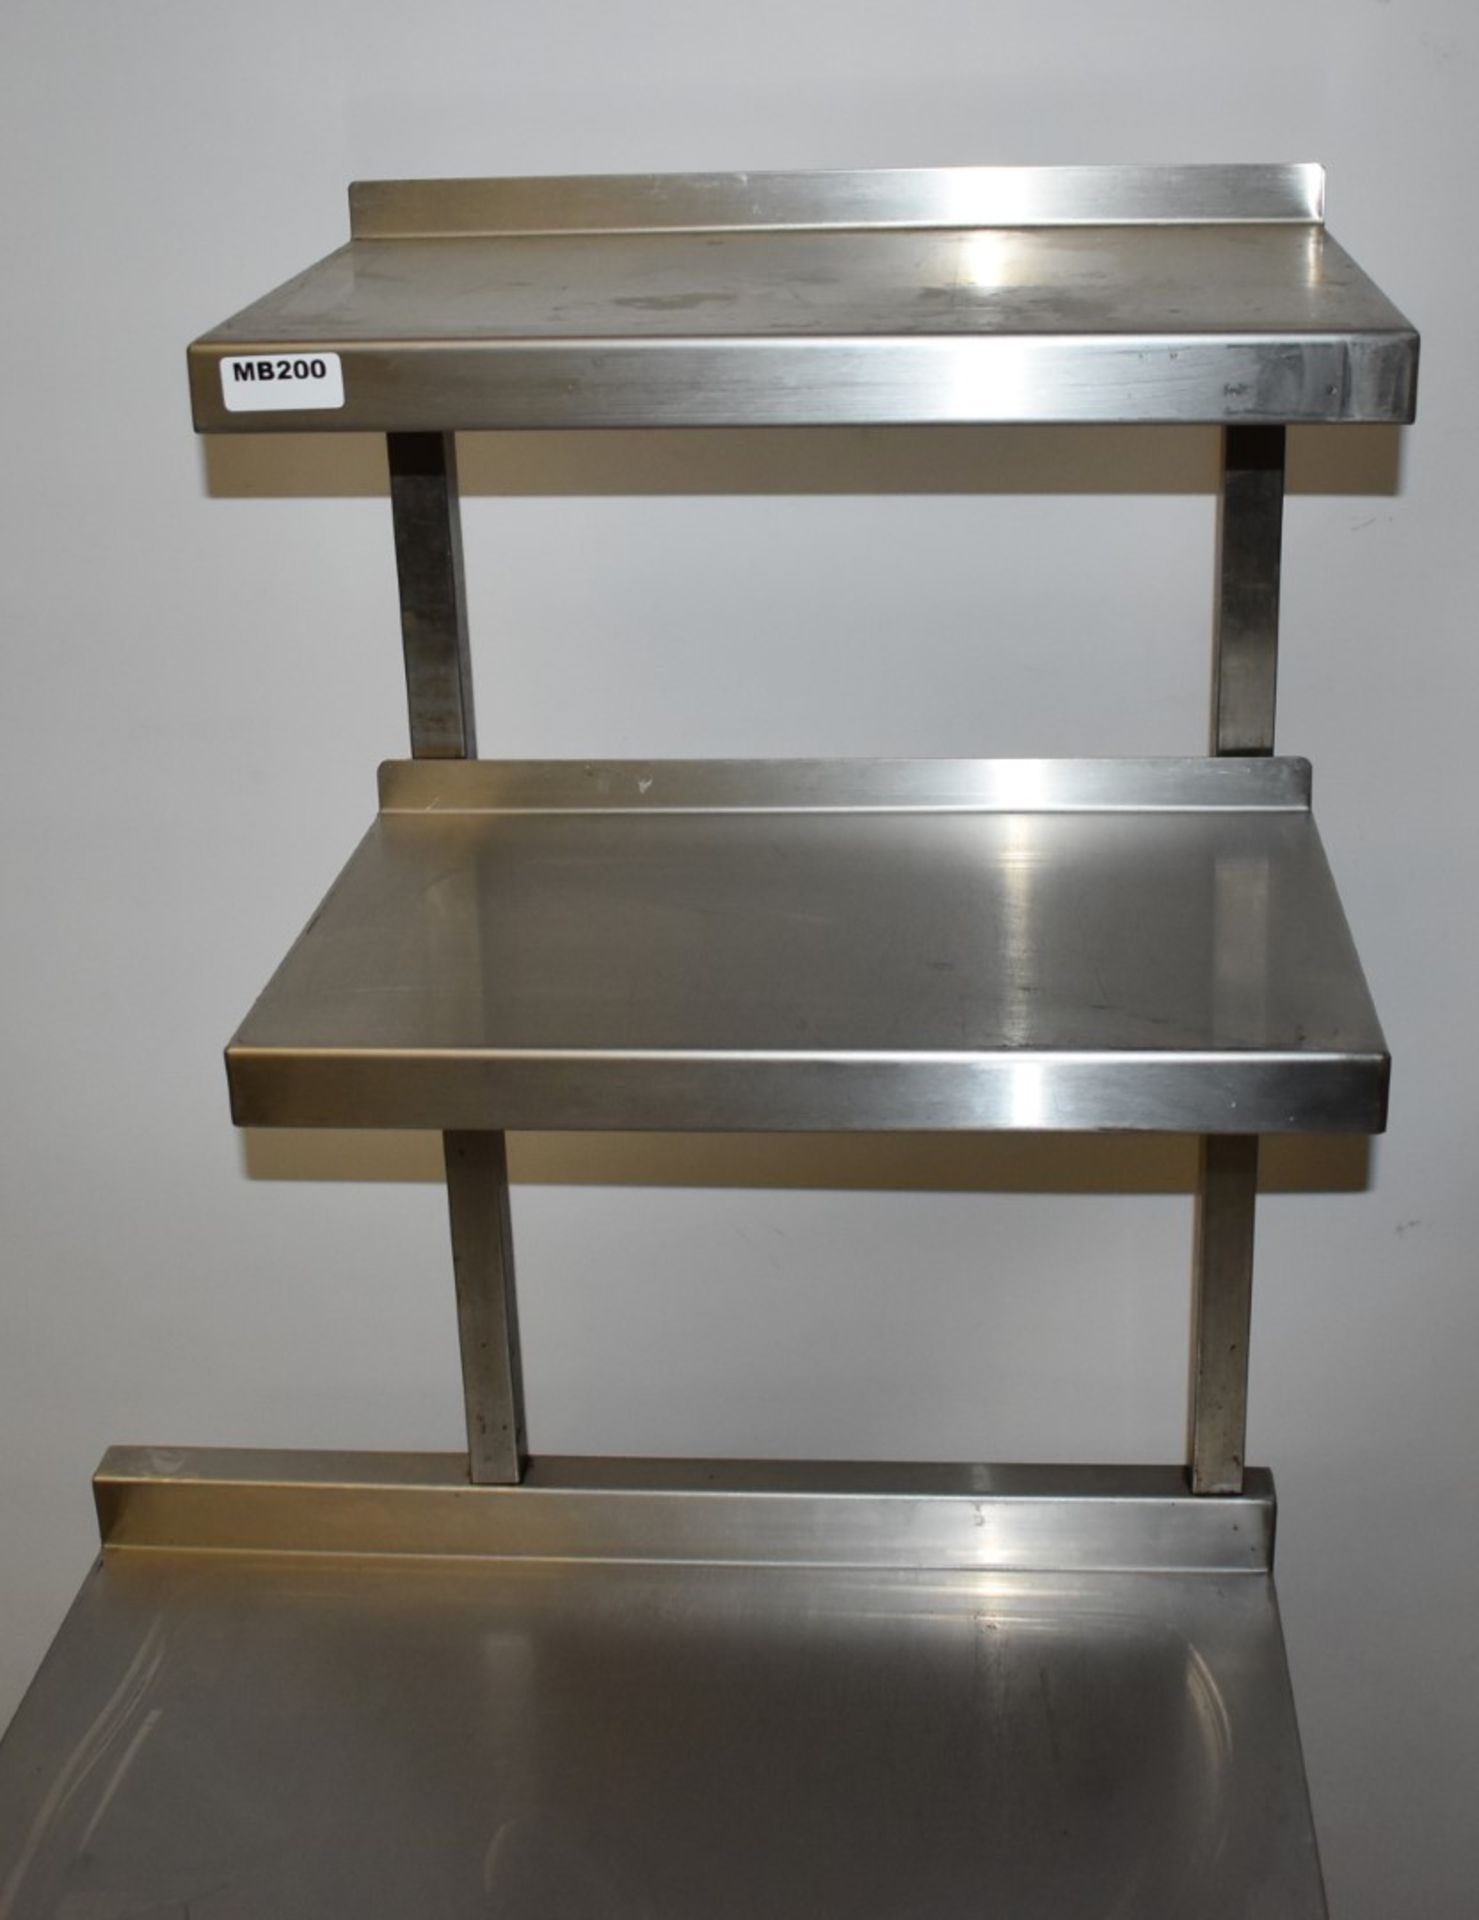 1 Stainless Steel Prep Bench With Undershelf and Overhead Shelves - H92/169 x W71 x D65 cms - - Image 4 of 4